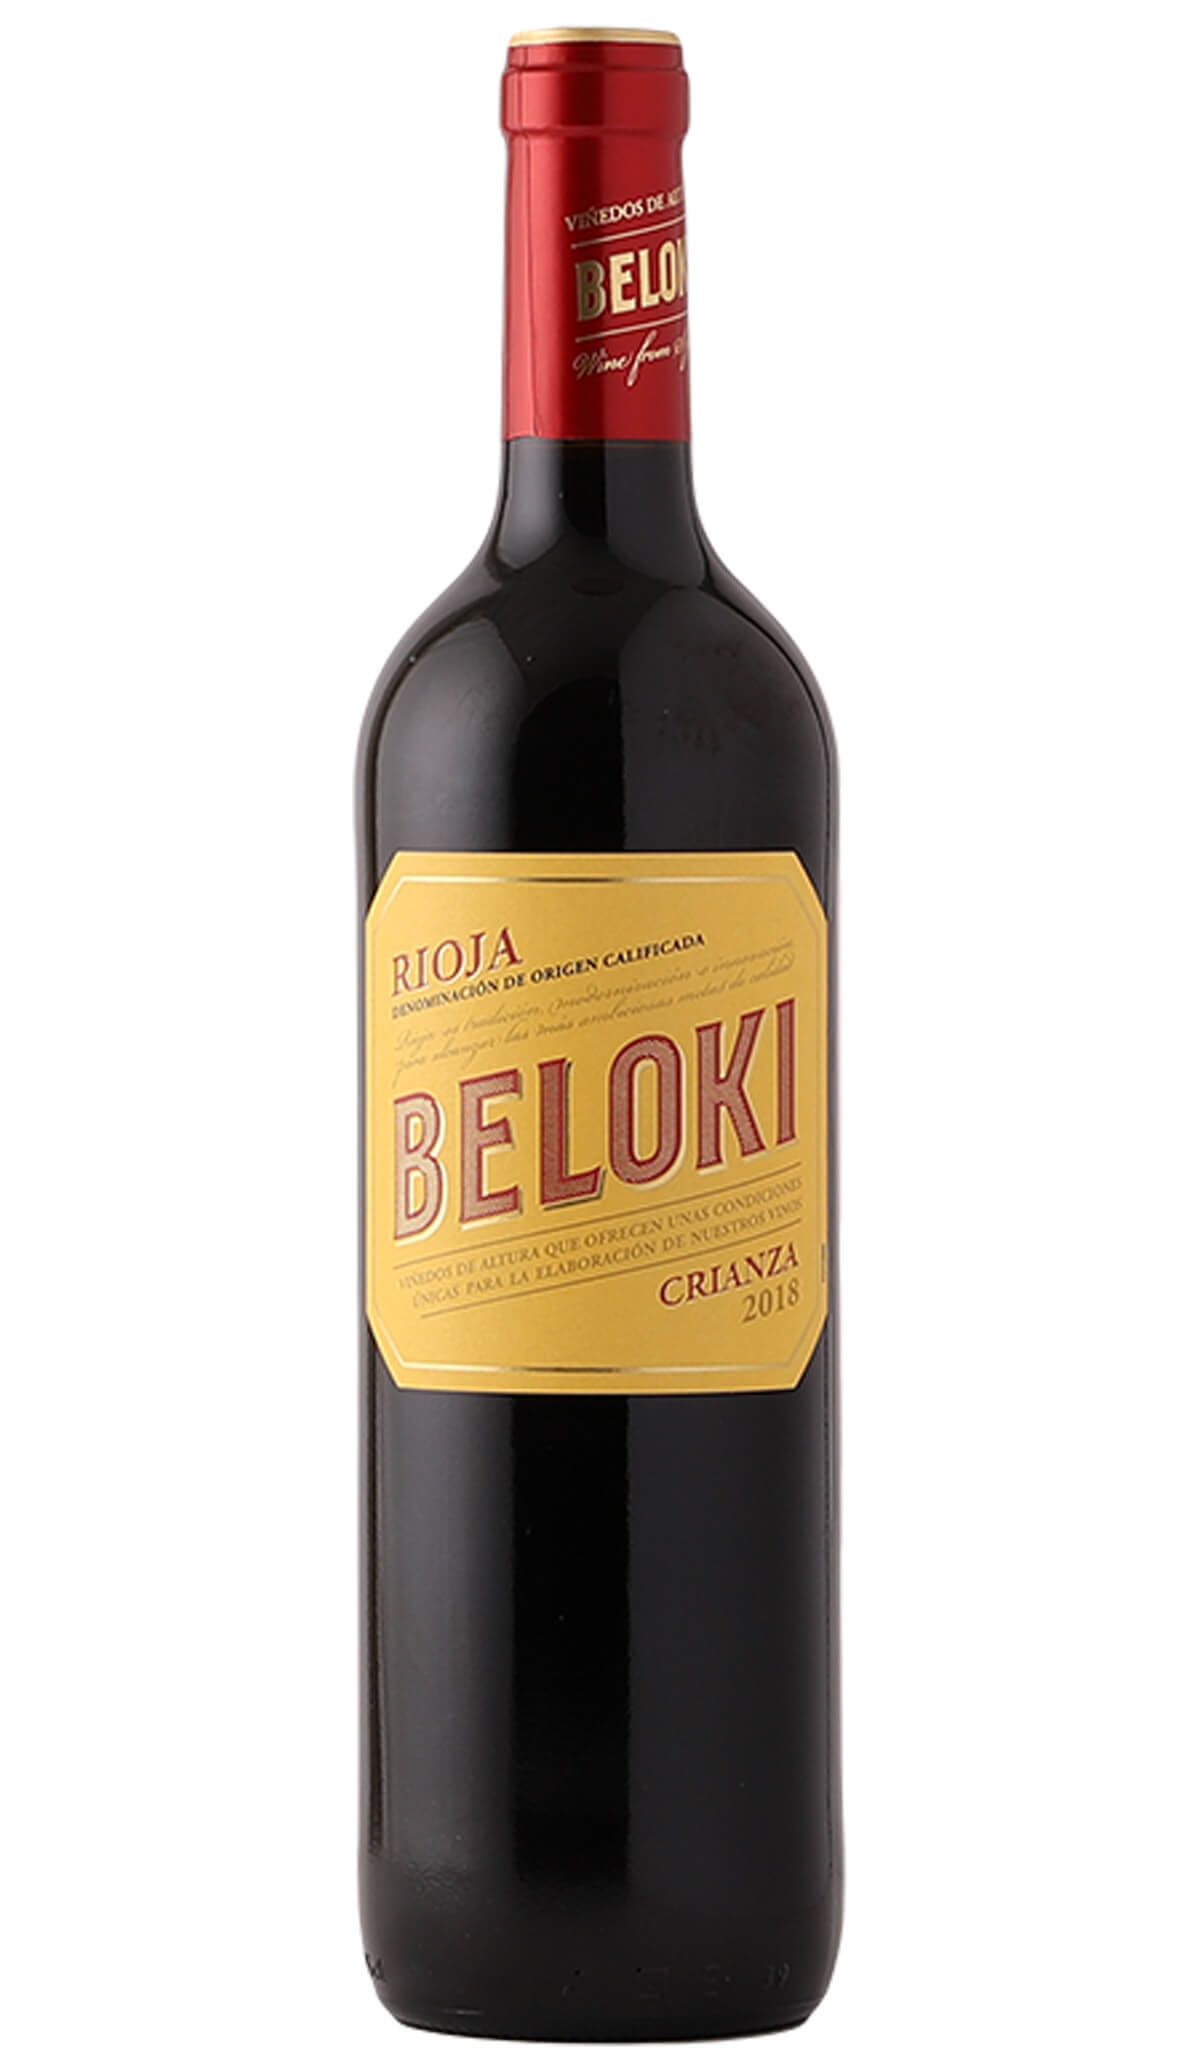 Find out more, explore the range and buy Beloki Rioja Crianza Tempranillo 2018 (Spain) available online at Wine Sellers Direct - Australia's independent liquor specialists.